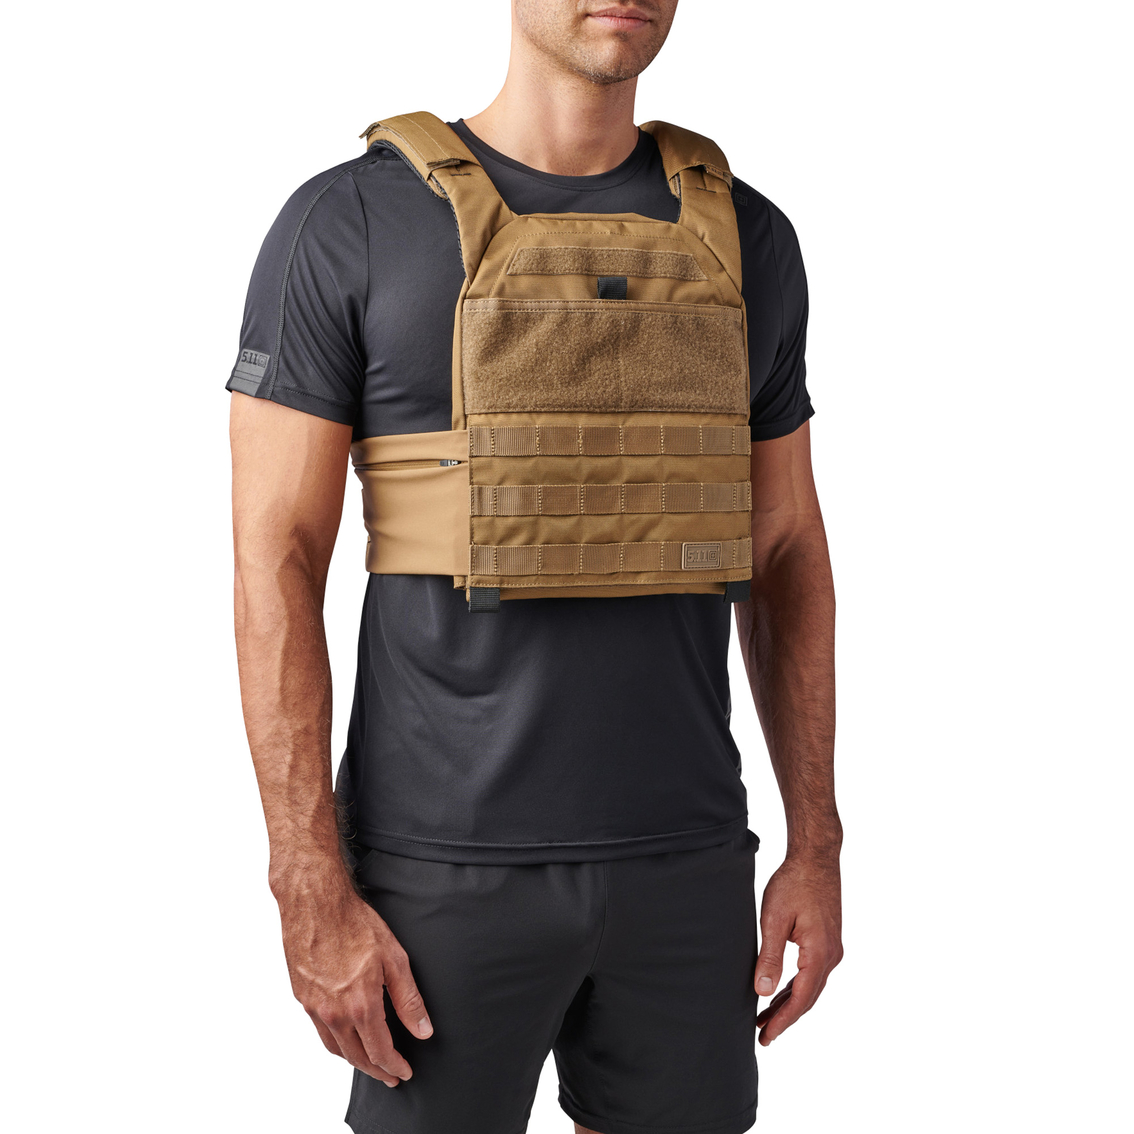 5.11 Tacted Trainer Weight Vest, Strength Training